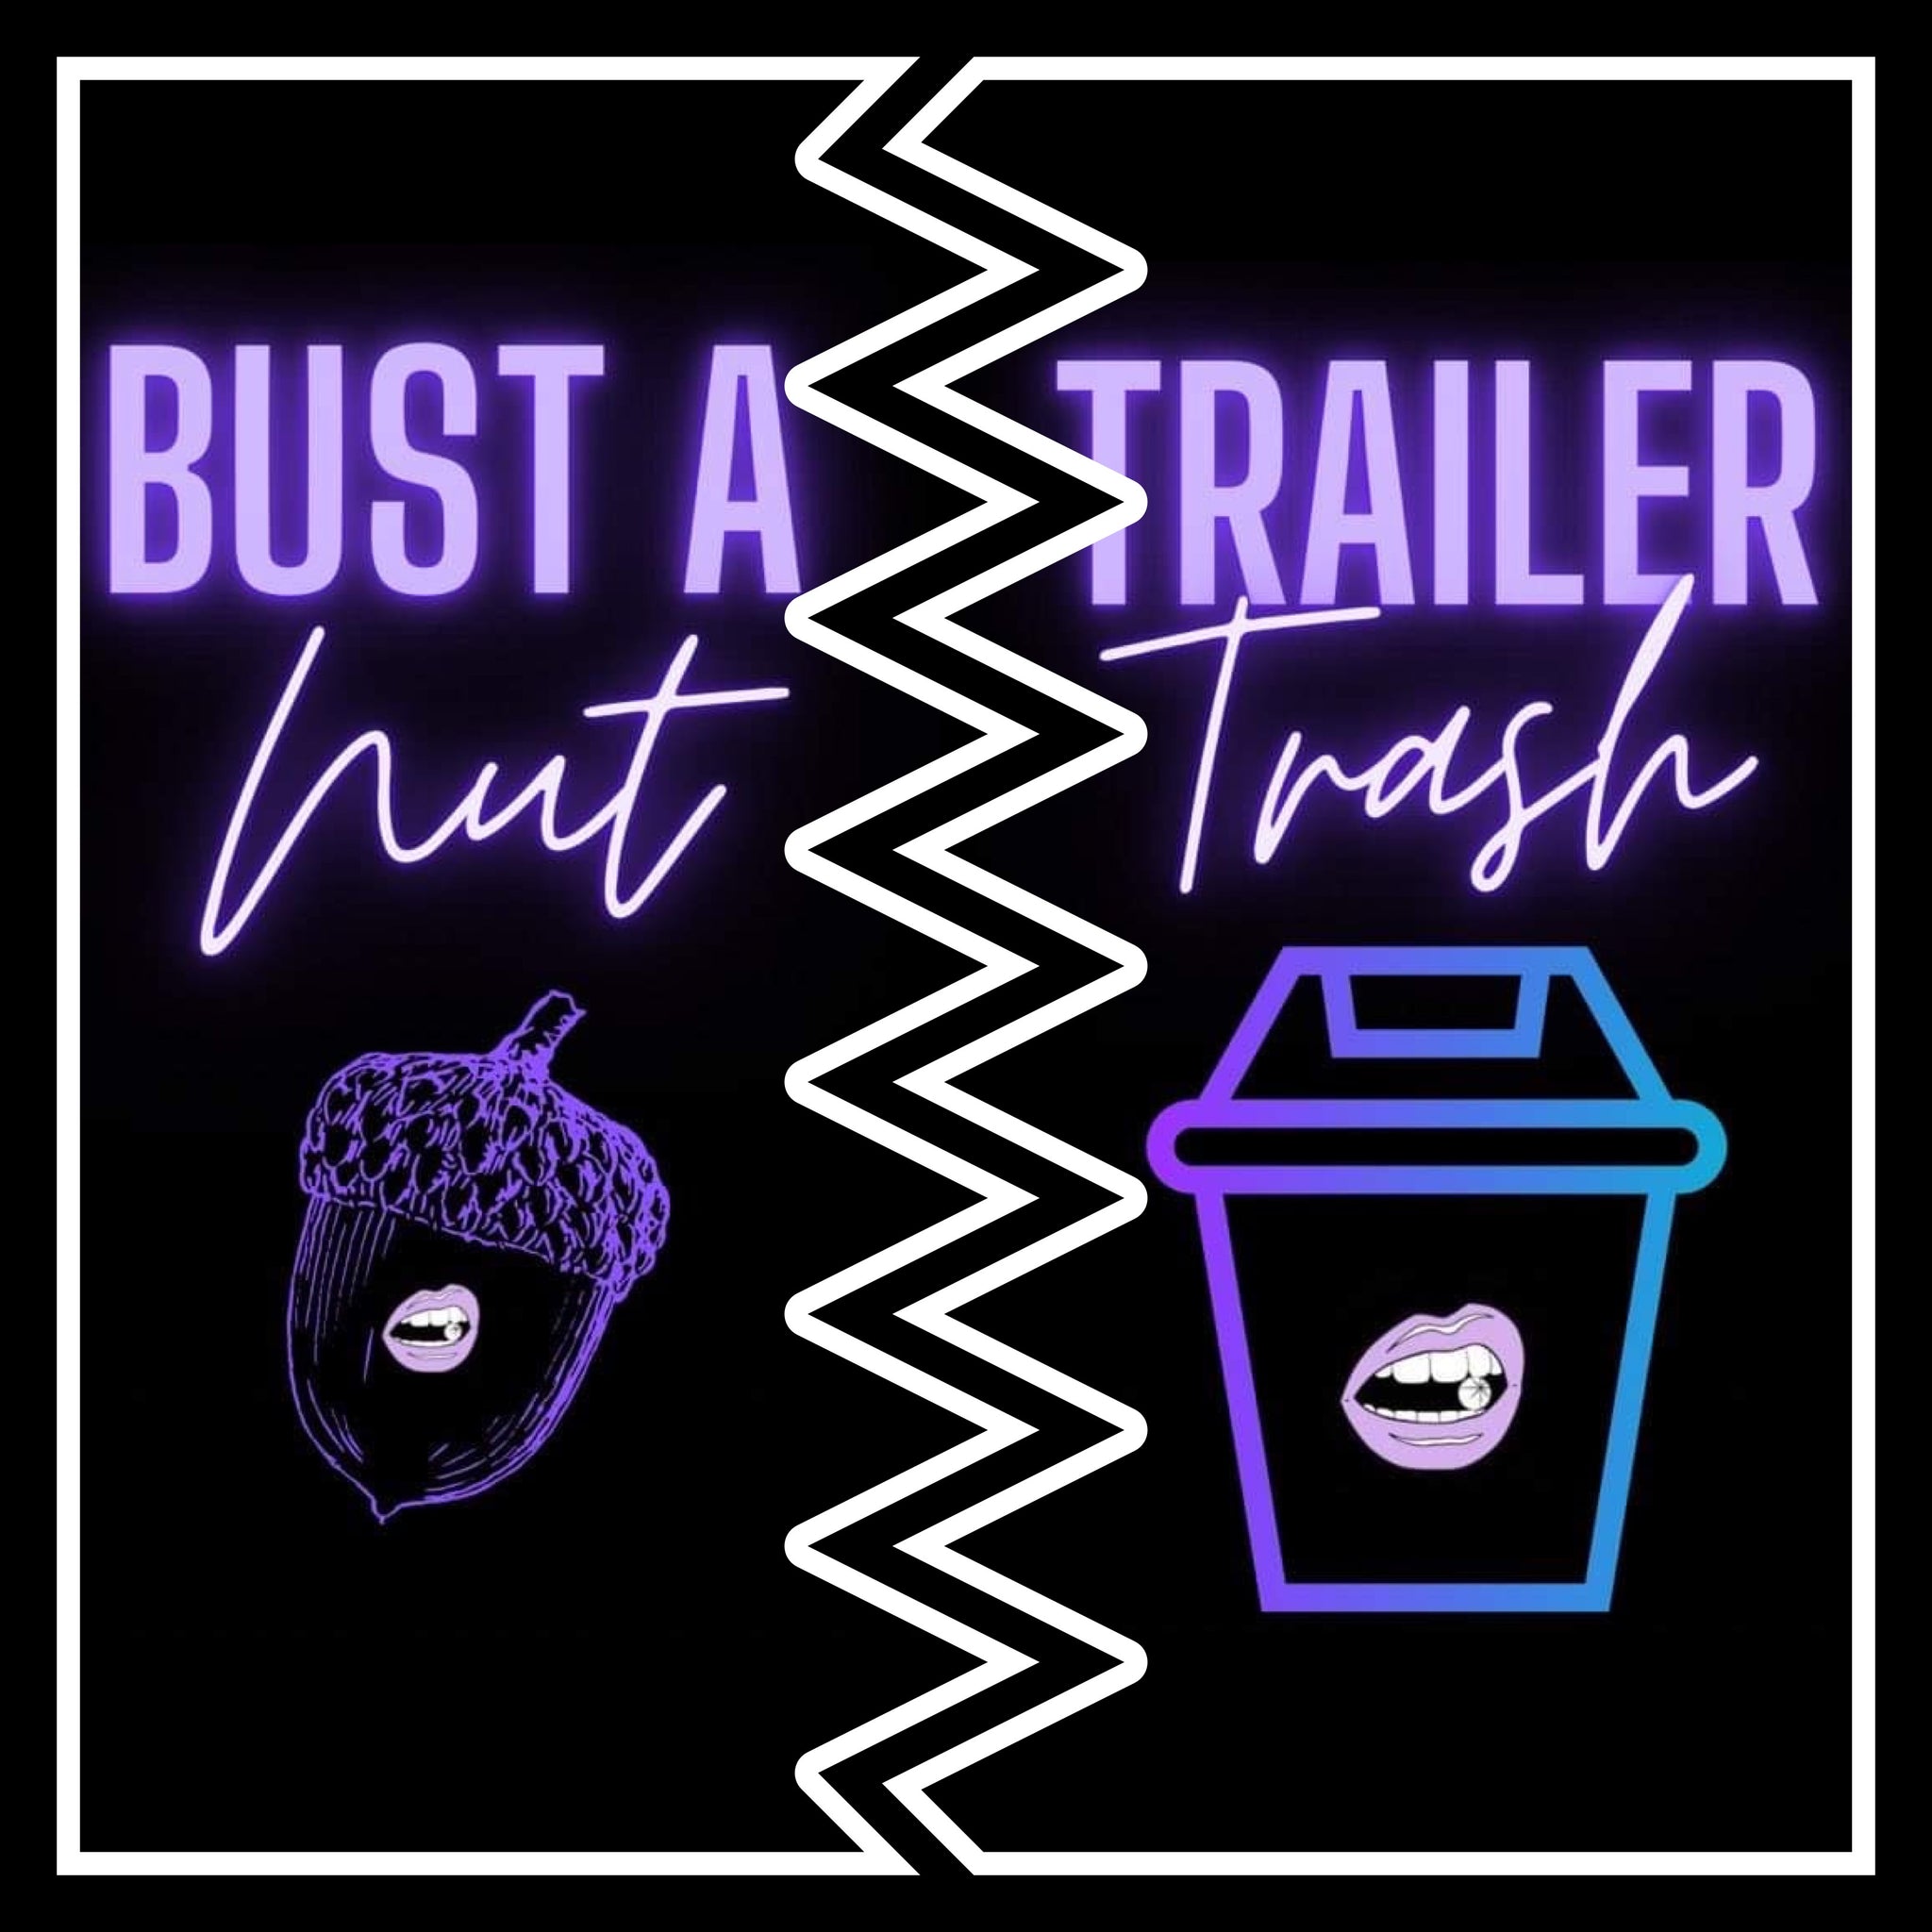 The Bust a Nut Trailer Trash combo!